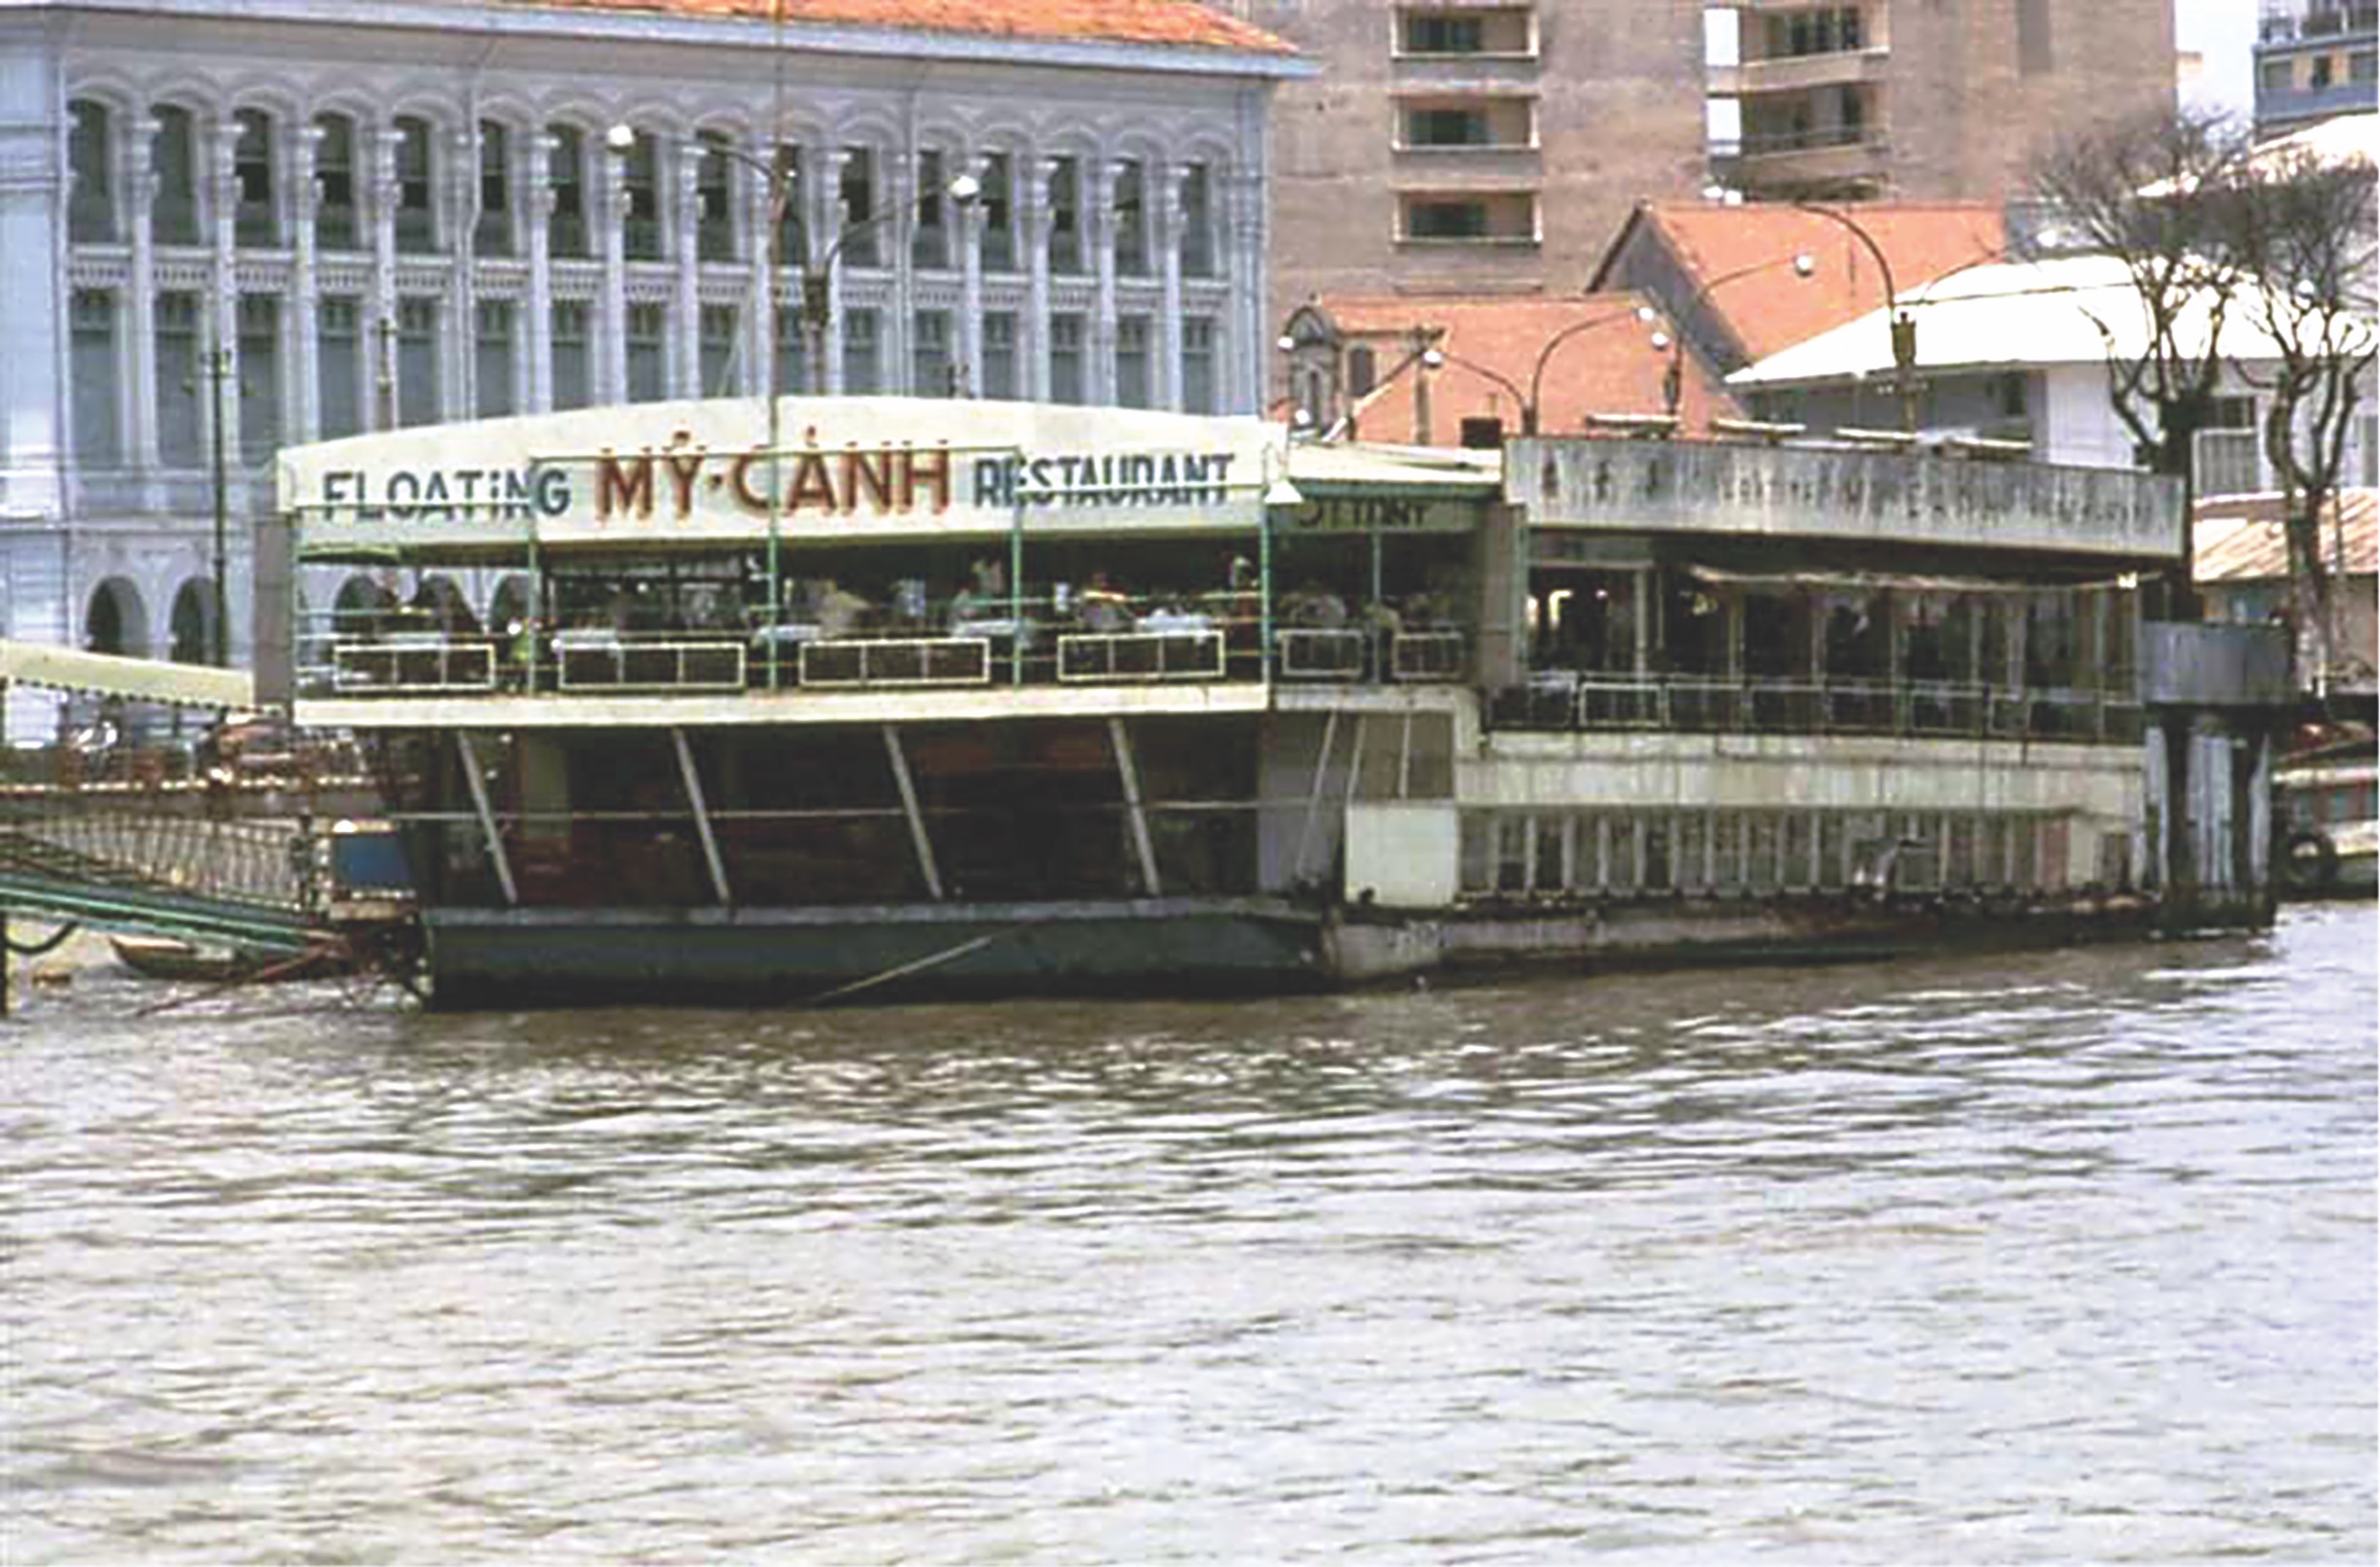 Diners at the floating restaurant, popular with Americans, were sprayed with deadly projectiles from two electronically detonated bombs set by the Viet Cong. (VNAFmamn.com)